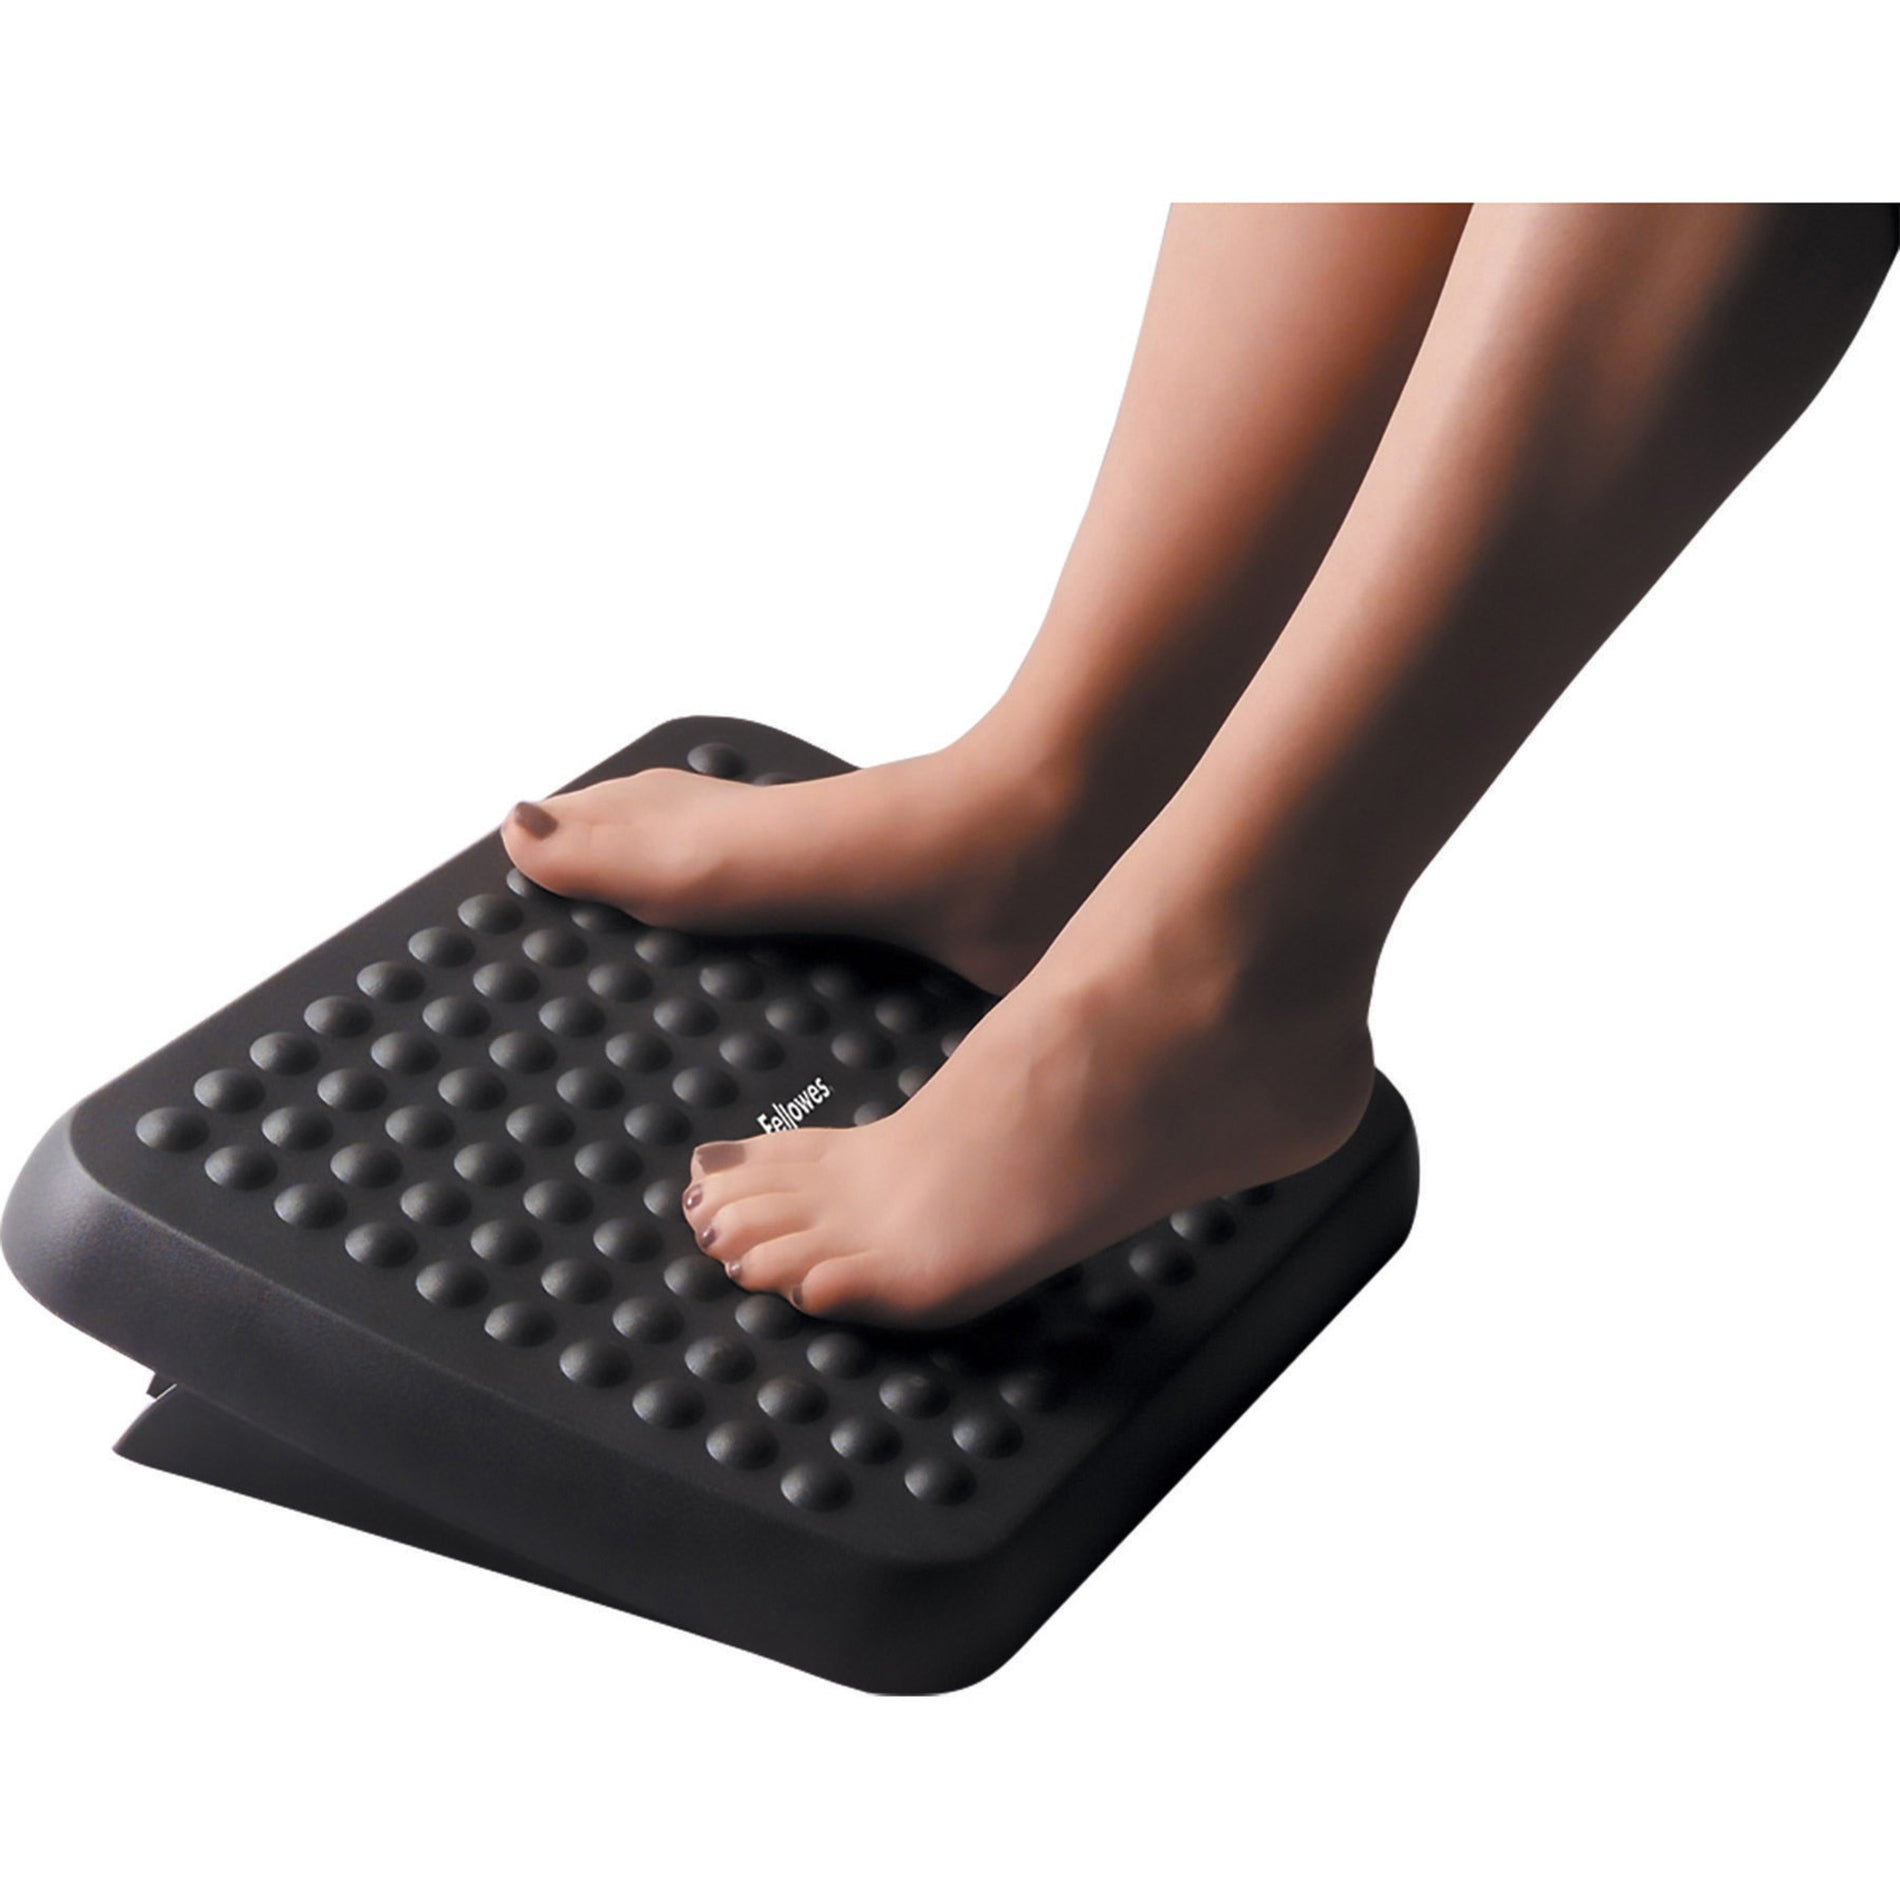 Fellowes 48121 Standard Foot Rest, Adjustable Height, Microban Protection, Free-floating Platform, Anti-fatigue, Massage, Graphite